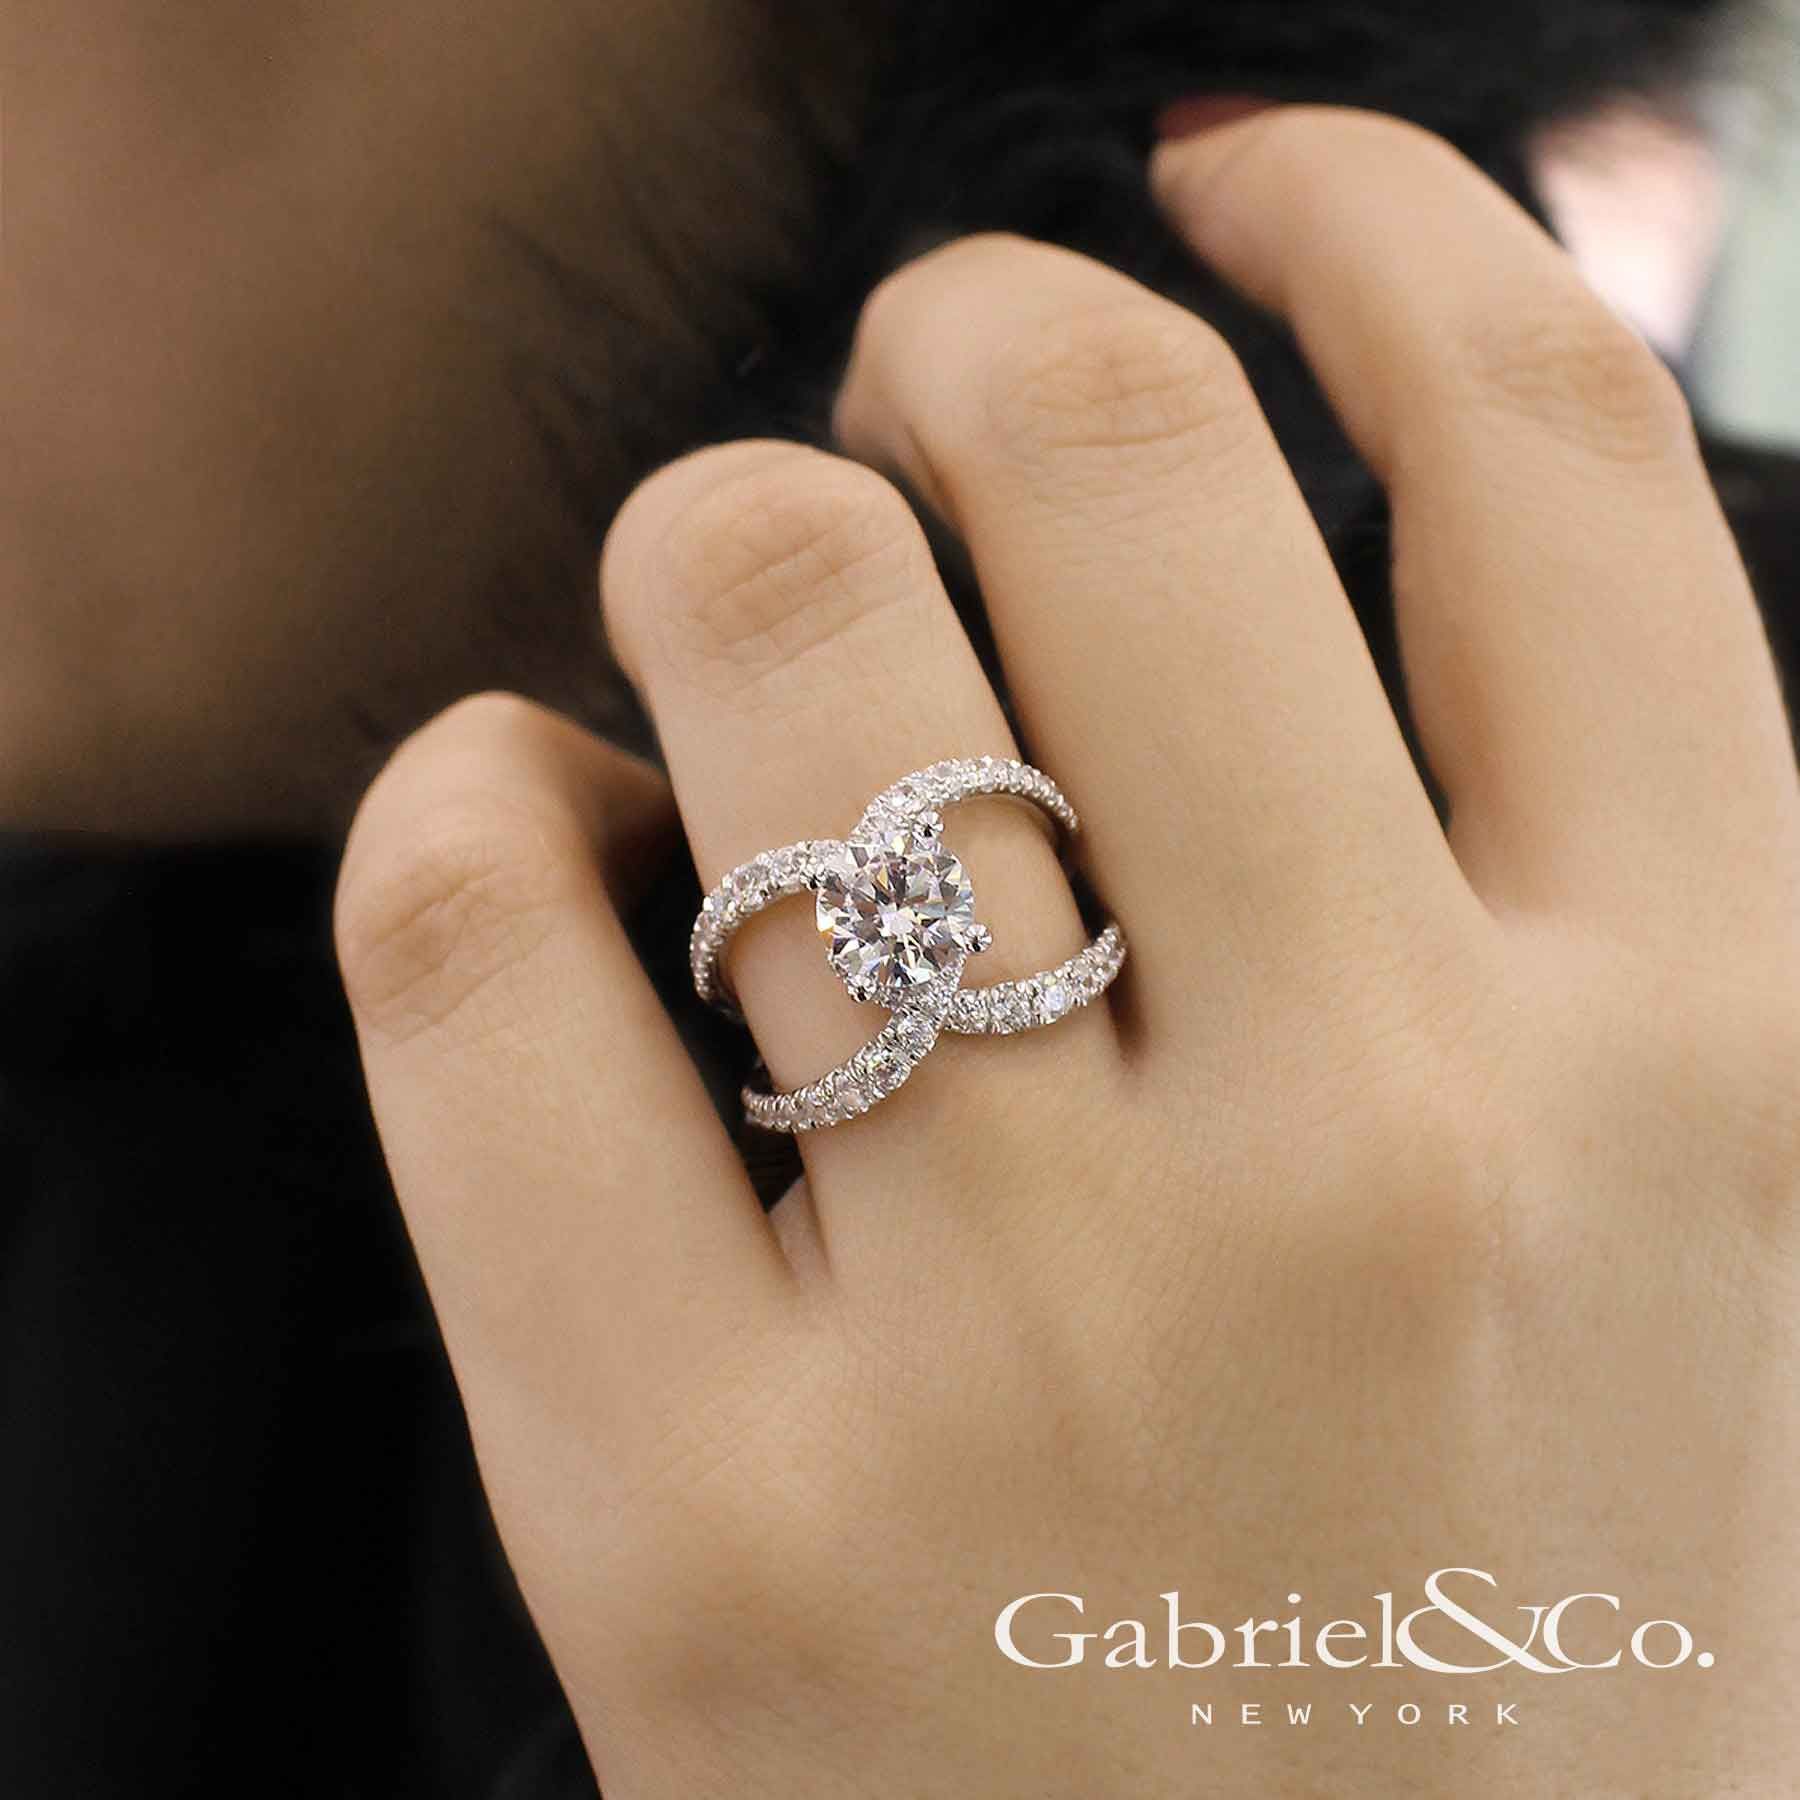 Gabriel & Co. – Voted #1 Most Preferred Bridal Brand.   A brightly, unique split shank band complements the classic round diamond